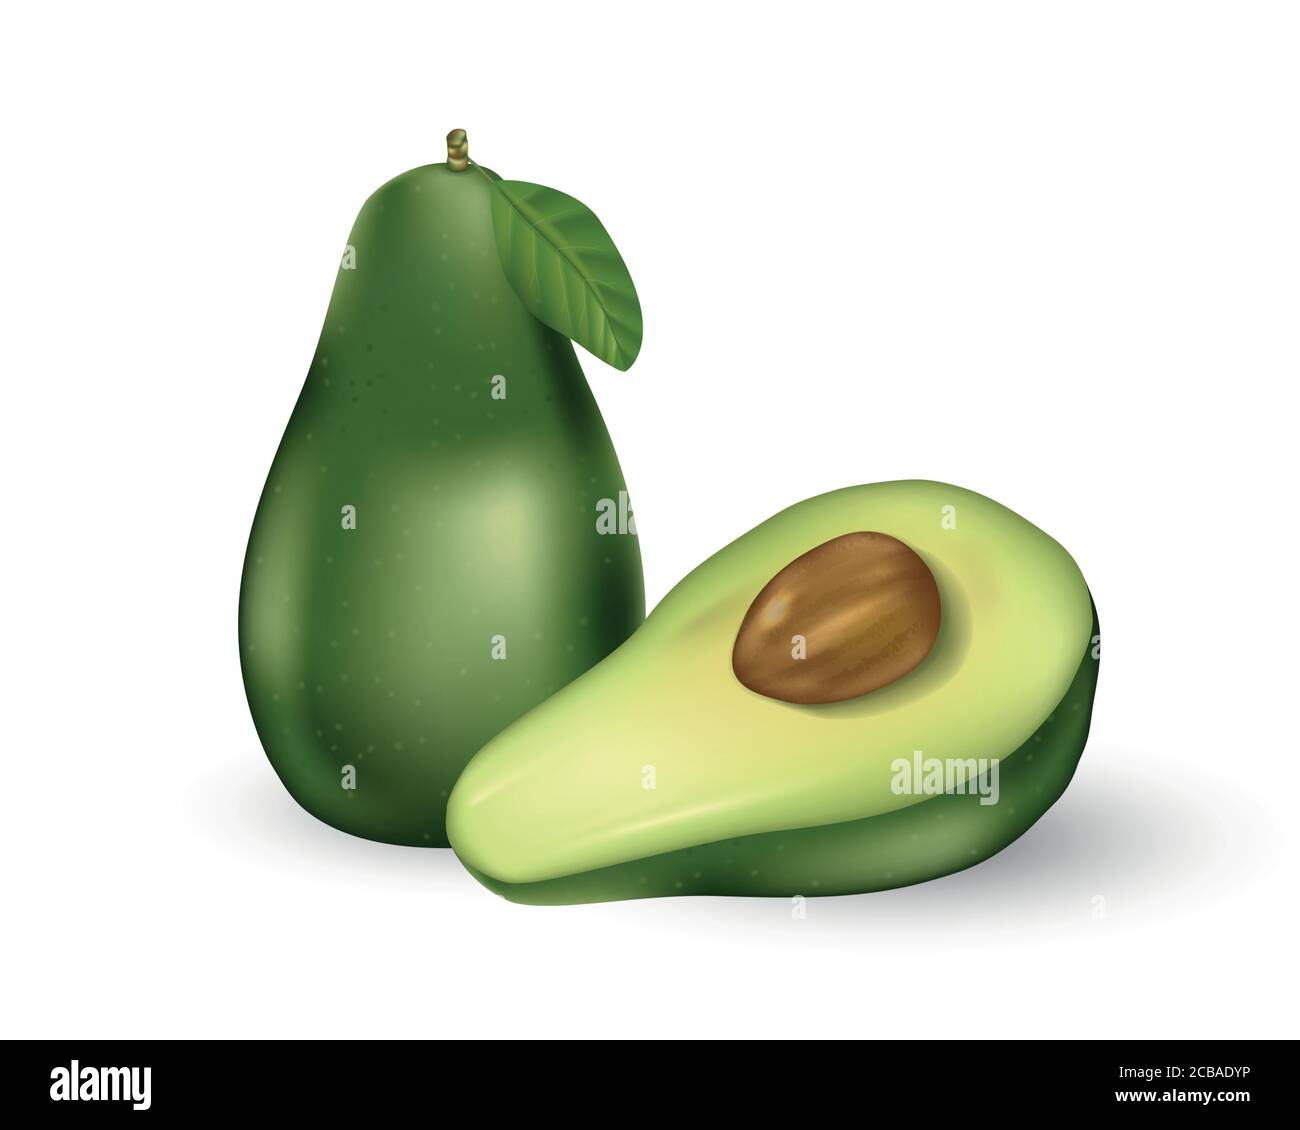 https://c8.alamy.com/comp/2CBADYP/realistic-fresh-fruit-avocado-isolated-on-white-whole-and-cut-in-half-avocado-with-seed-and-green-leaf-vector-illustration-2CBADYP.jpg